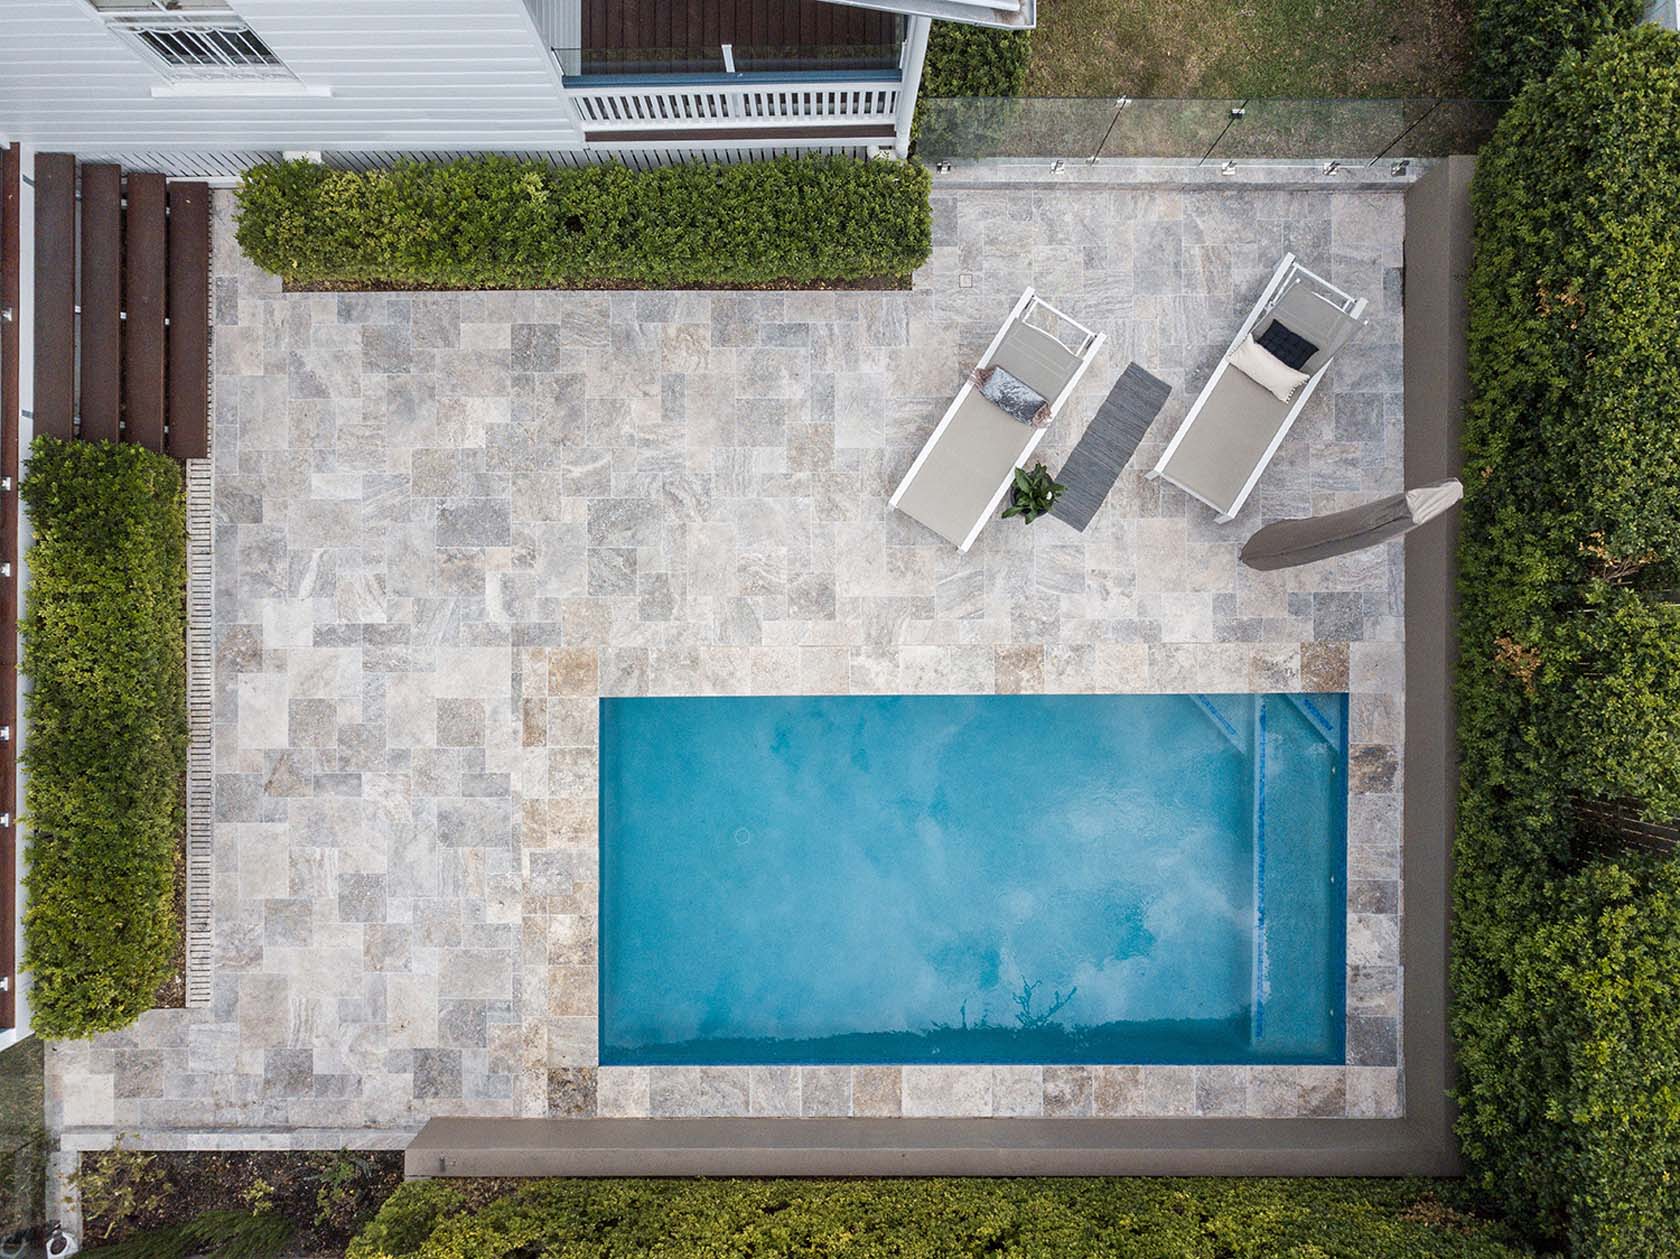 Silver Travertine pool coping and french pattern surrounds